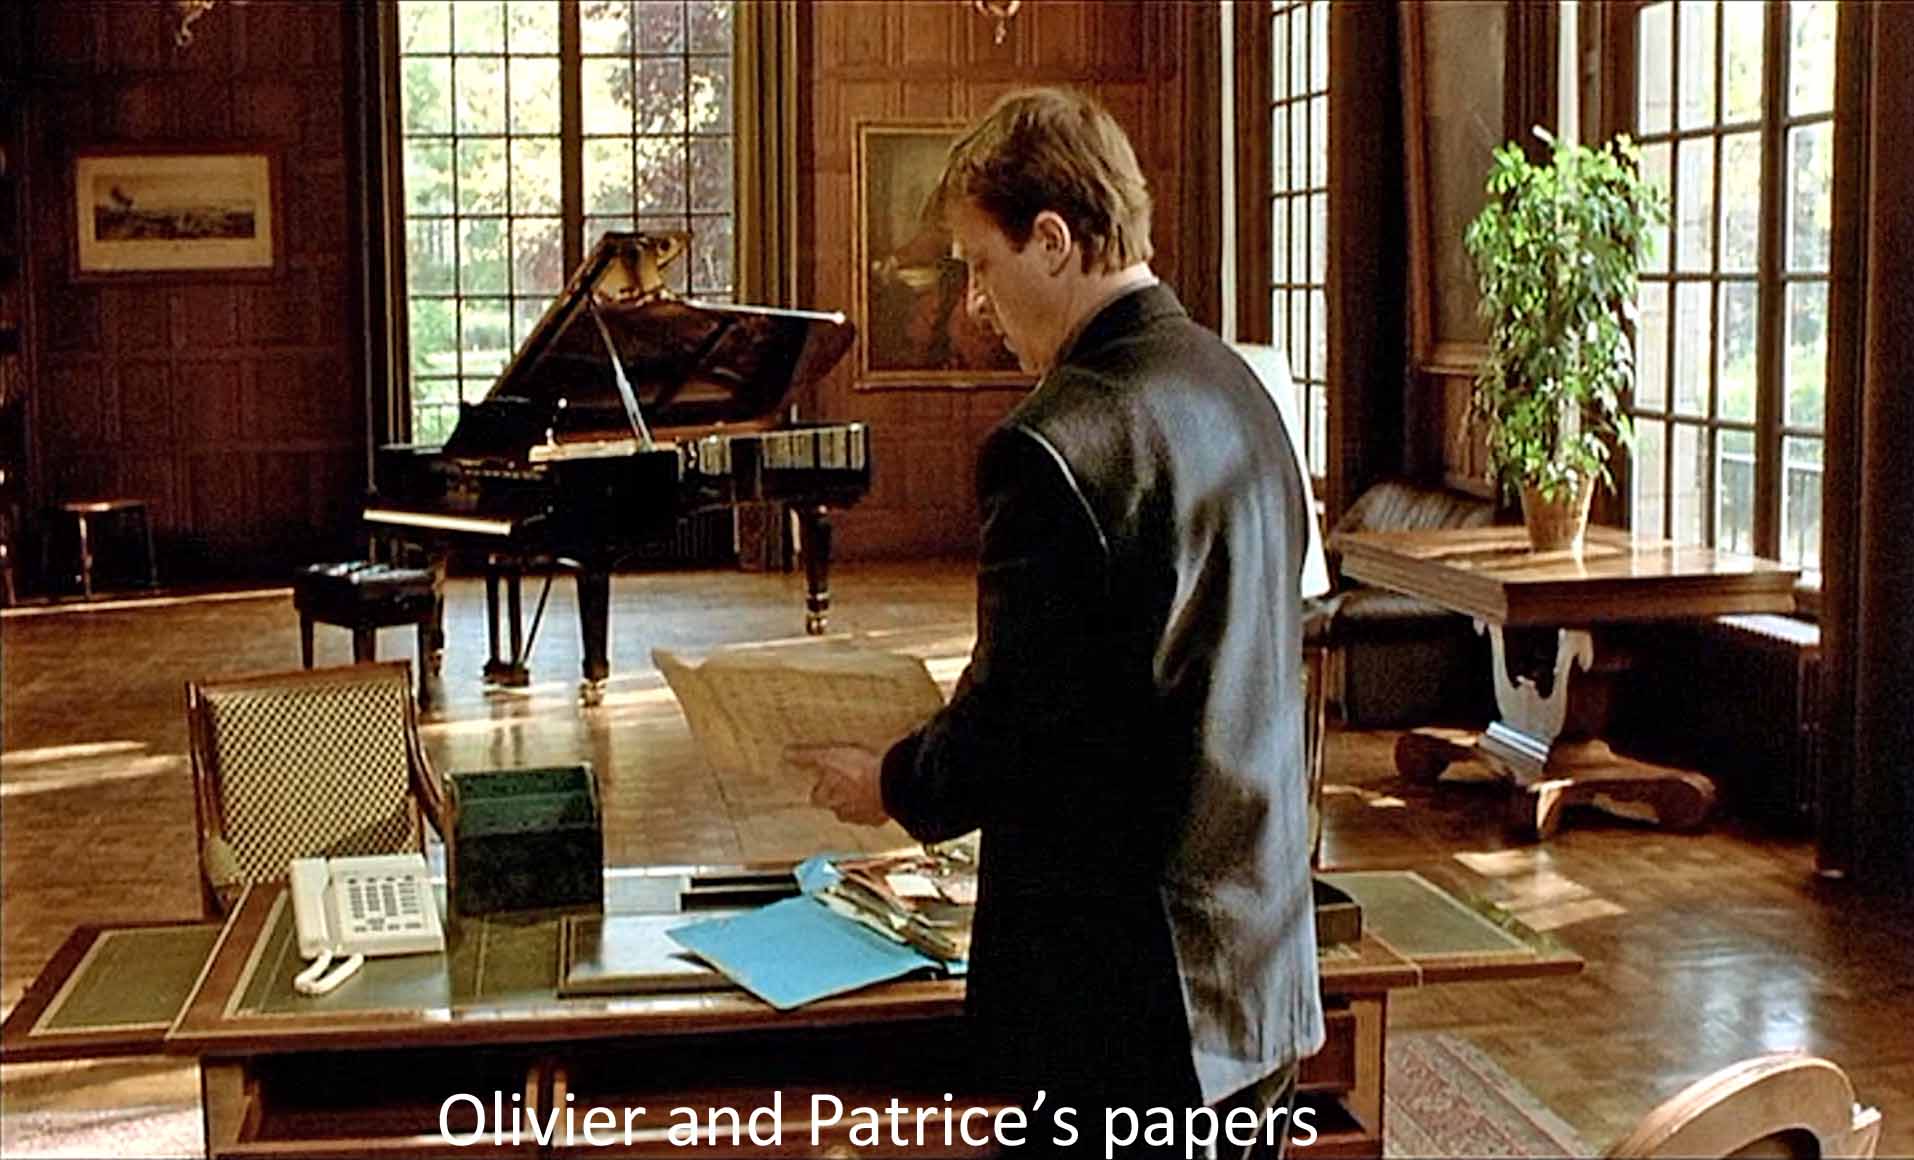 Olivier and Patrice's papers